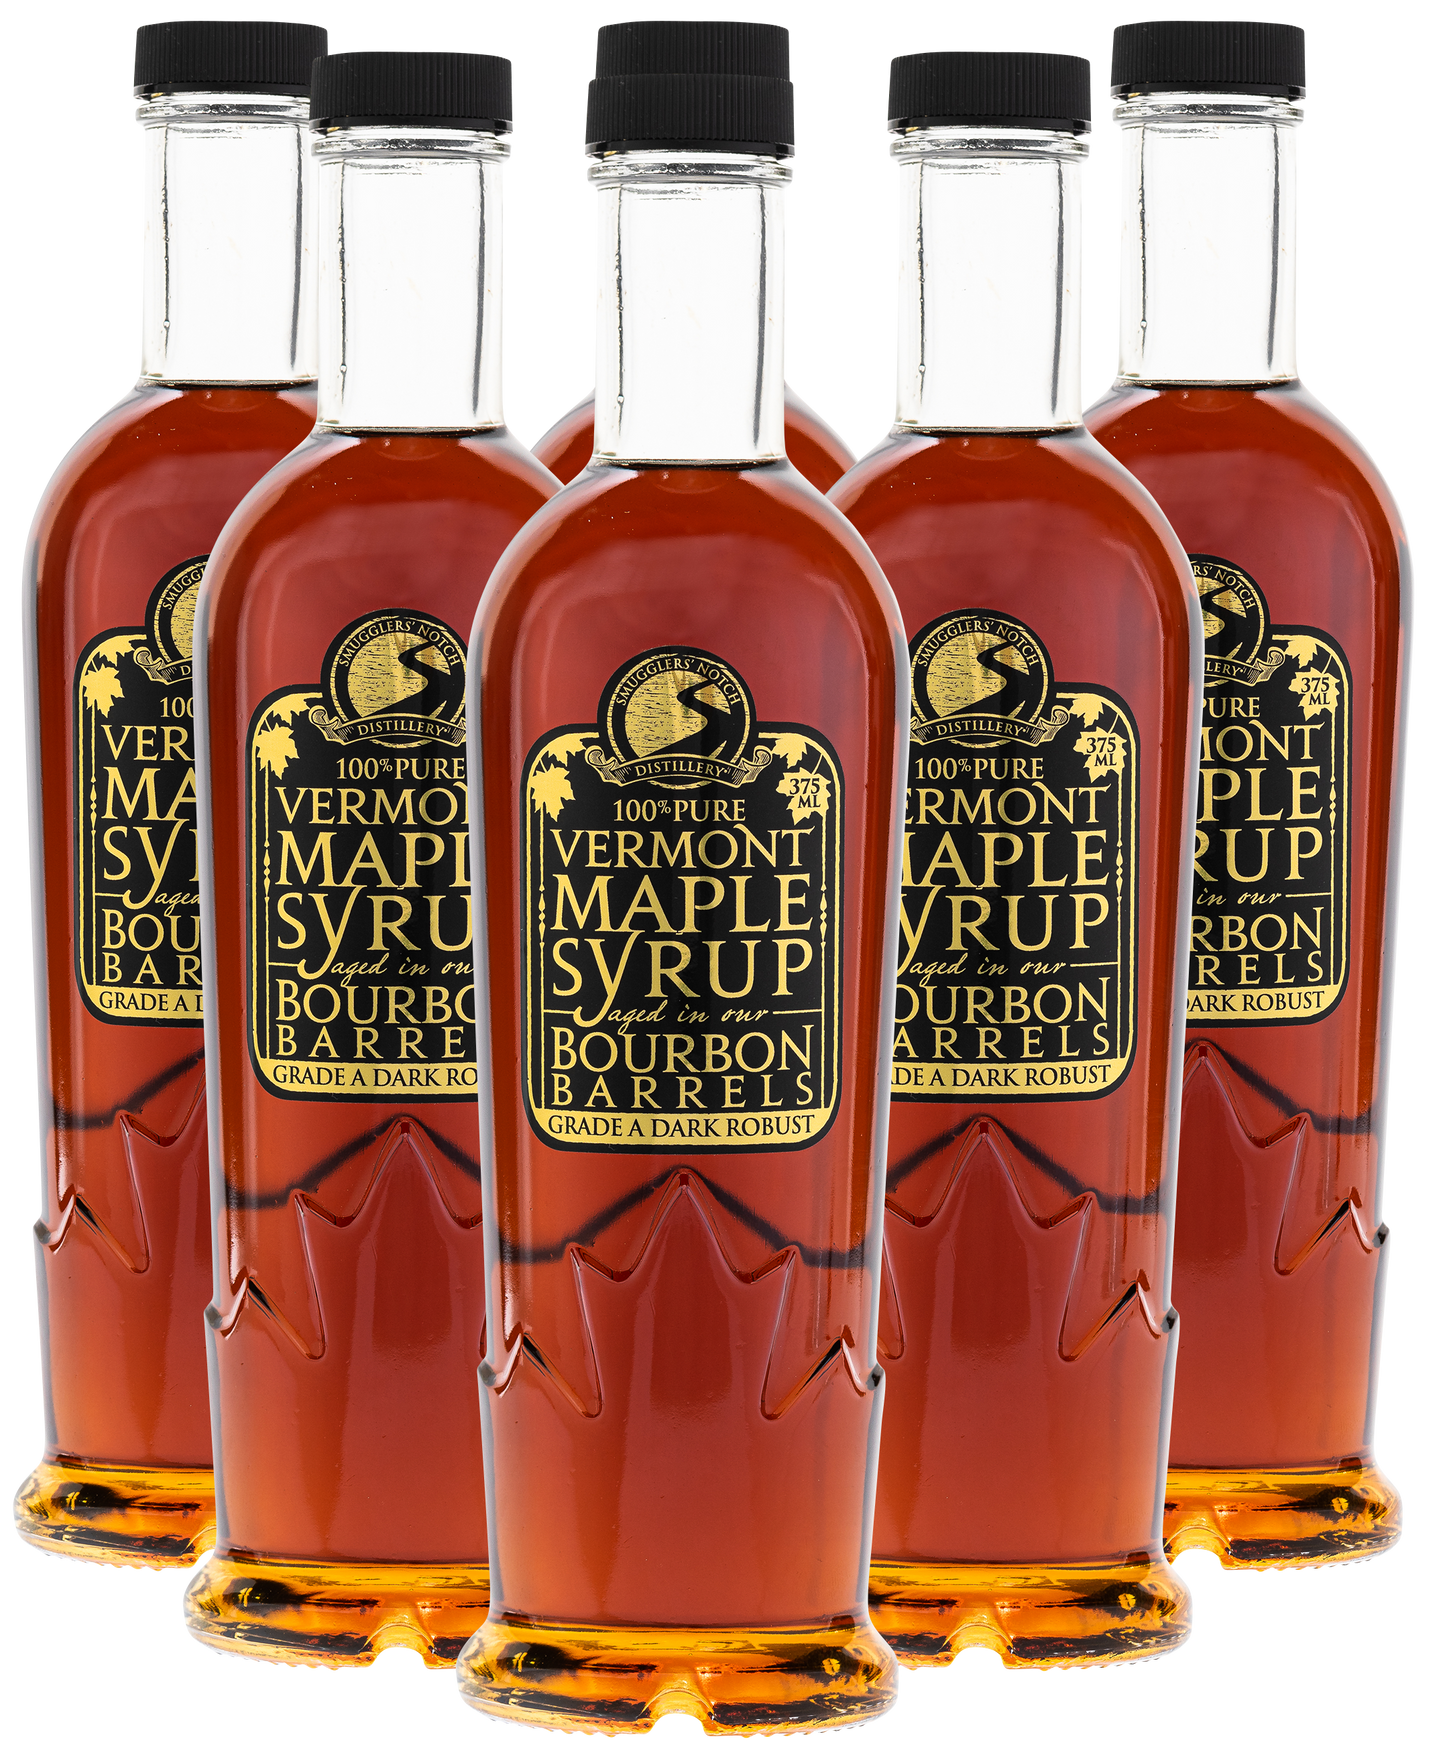 Six-Pack of 375mL Bourbon Barrel Aged Maple Syrup